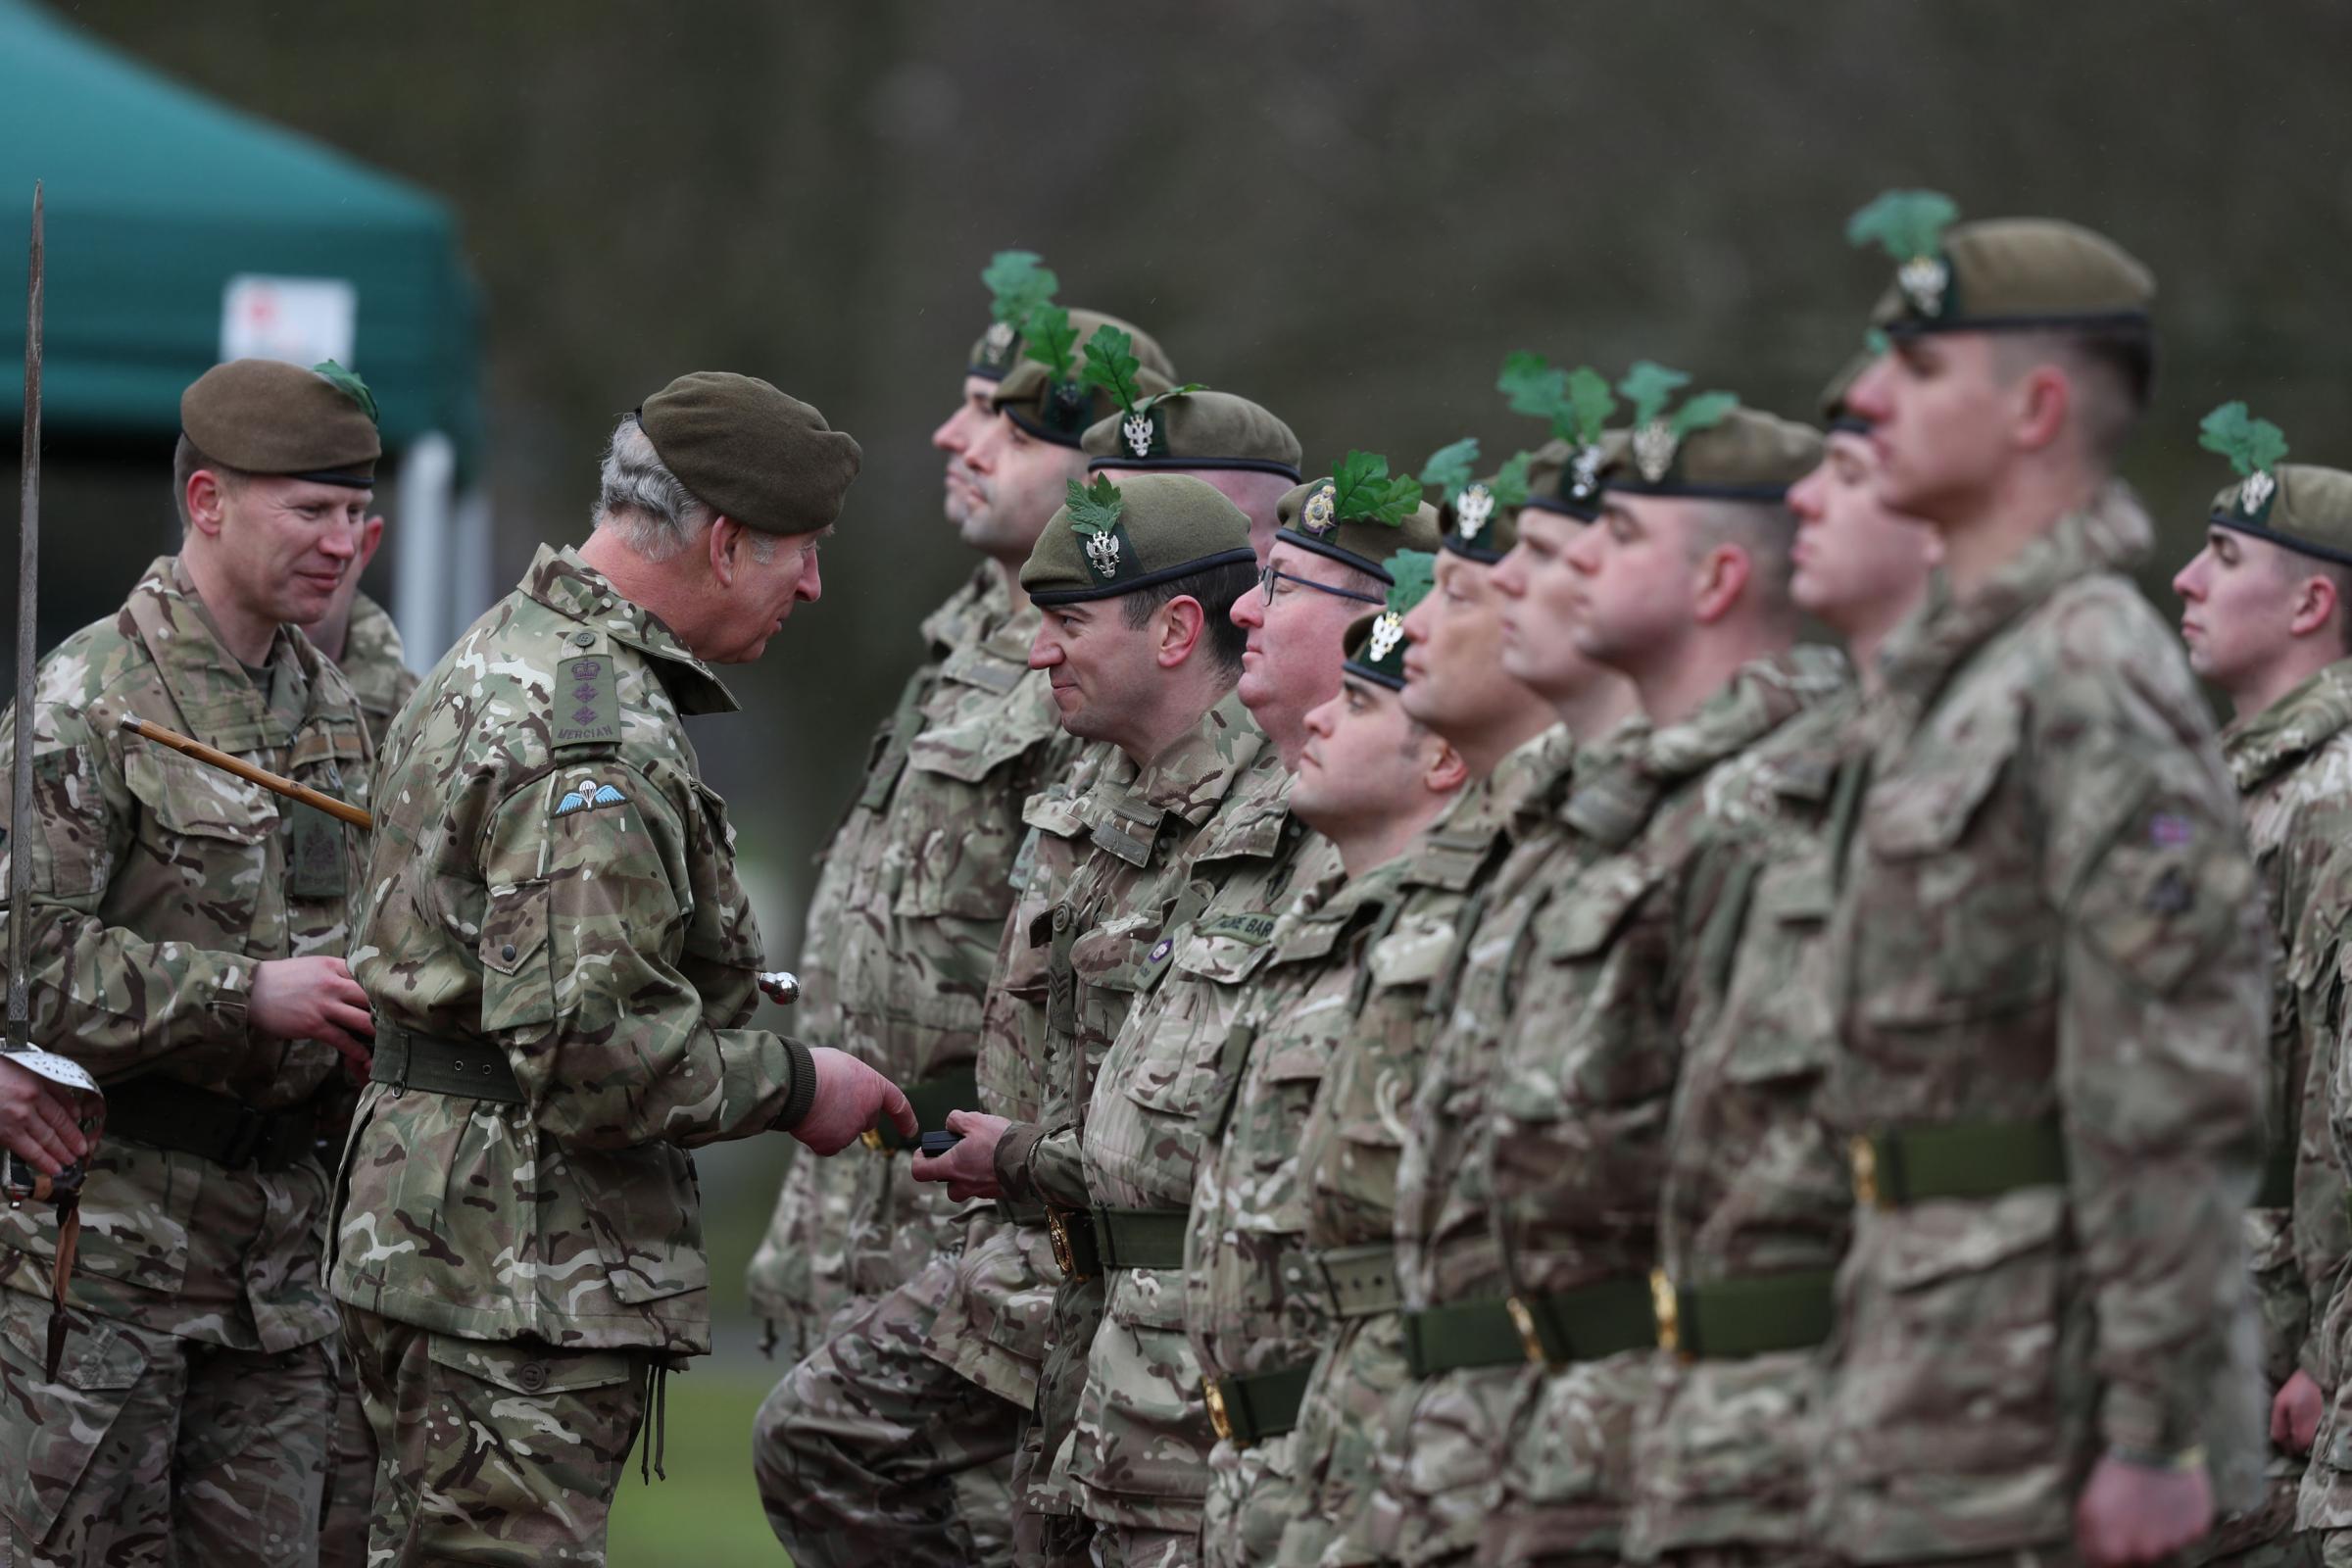 The Prince of Wales at Bulford Camp in Salisbury during a medal ceremony as he visits the 1st Battalion the Mercian Regiment to mark 10 years as colonel-in-chief and 40 years since becoming colonel-in-chief of the Cheshire Regiment. PRESS ASSOCIATION